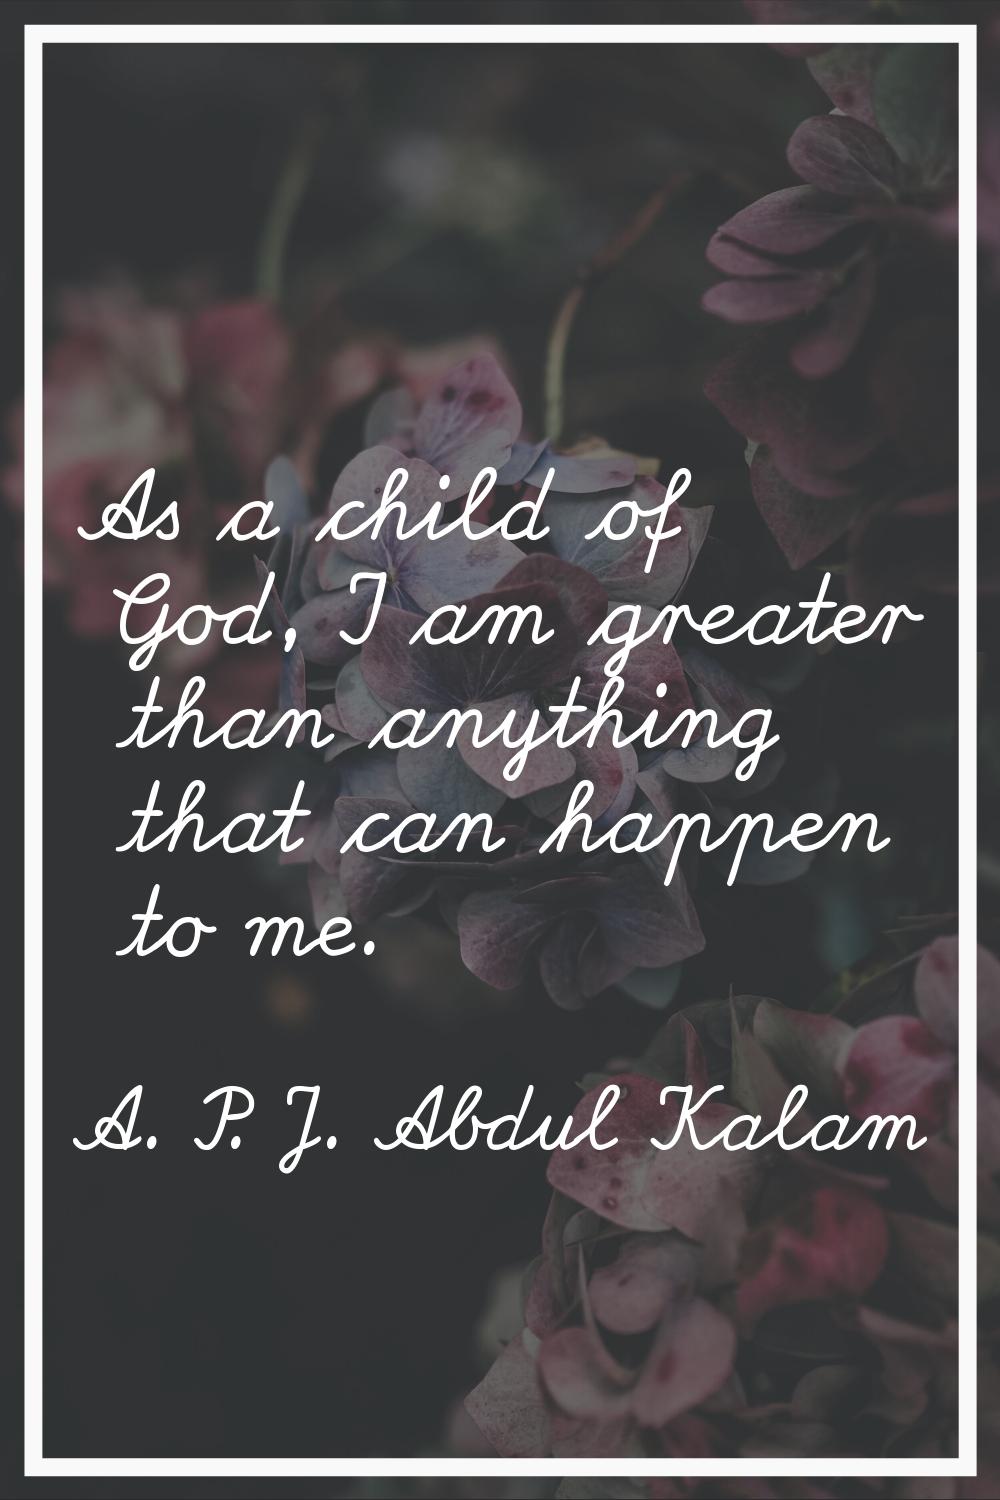 As a child of God, I am greater than anything that can happen to me.